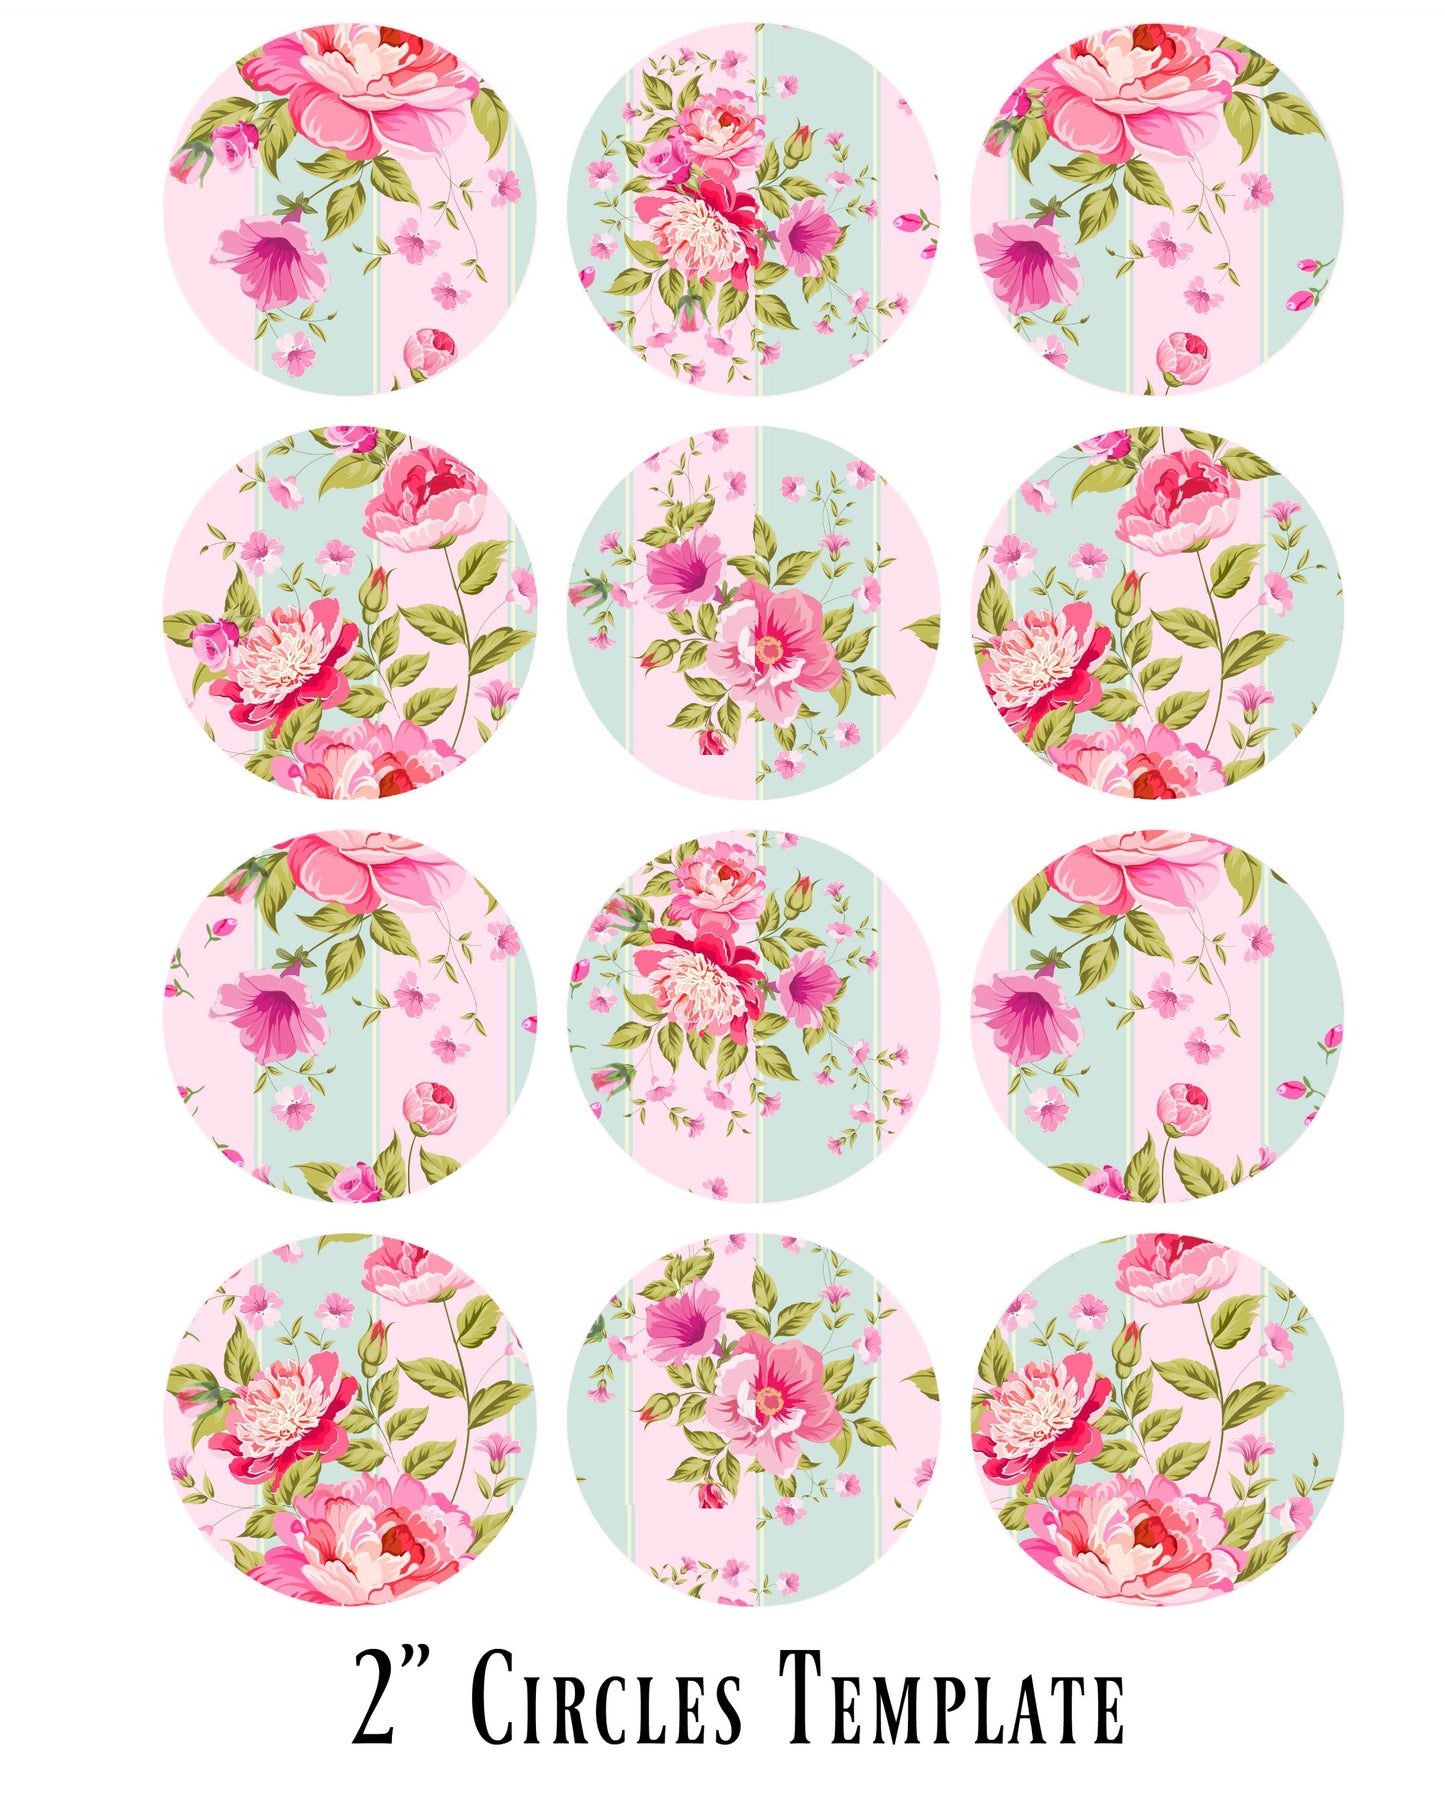 2" Circles Collage Sheet - Deb's Shabby Chic Pink Roses